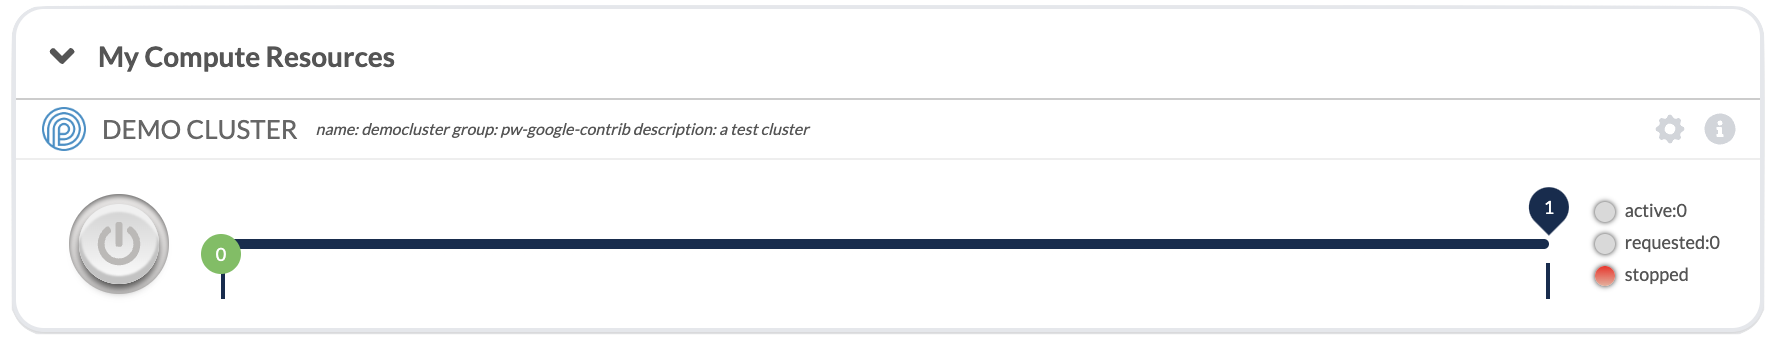 Screenshot of inactive cluster in Computing Resources module. The power button is grayed out and the stopped bubble on the right is red.